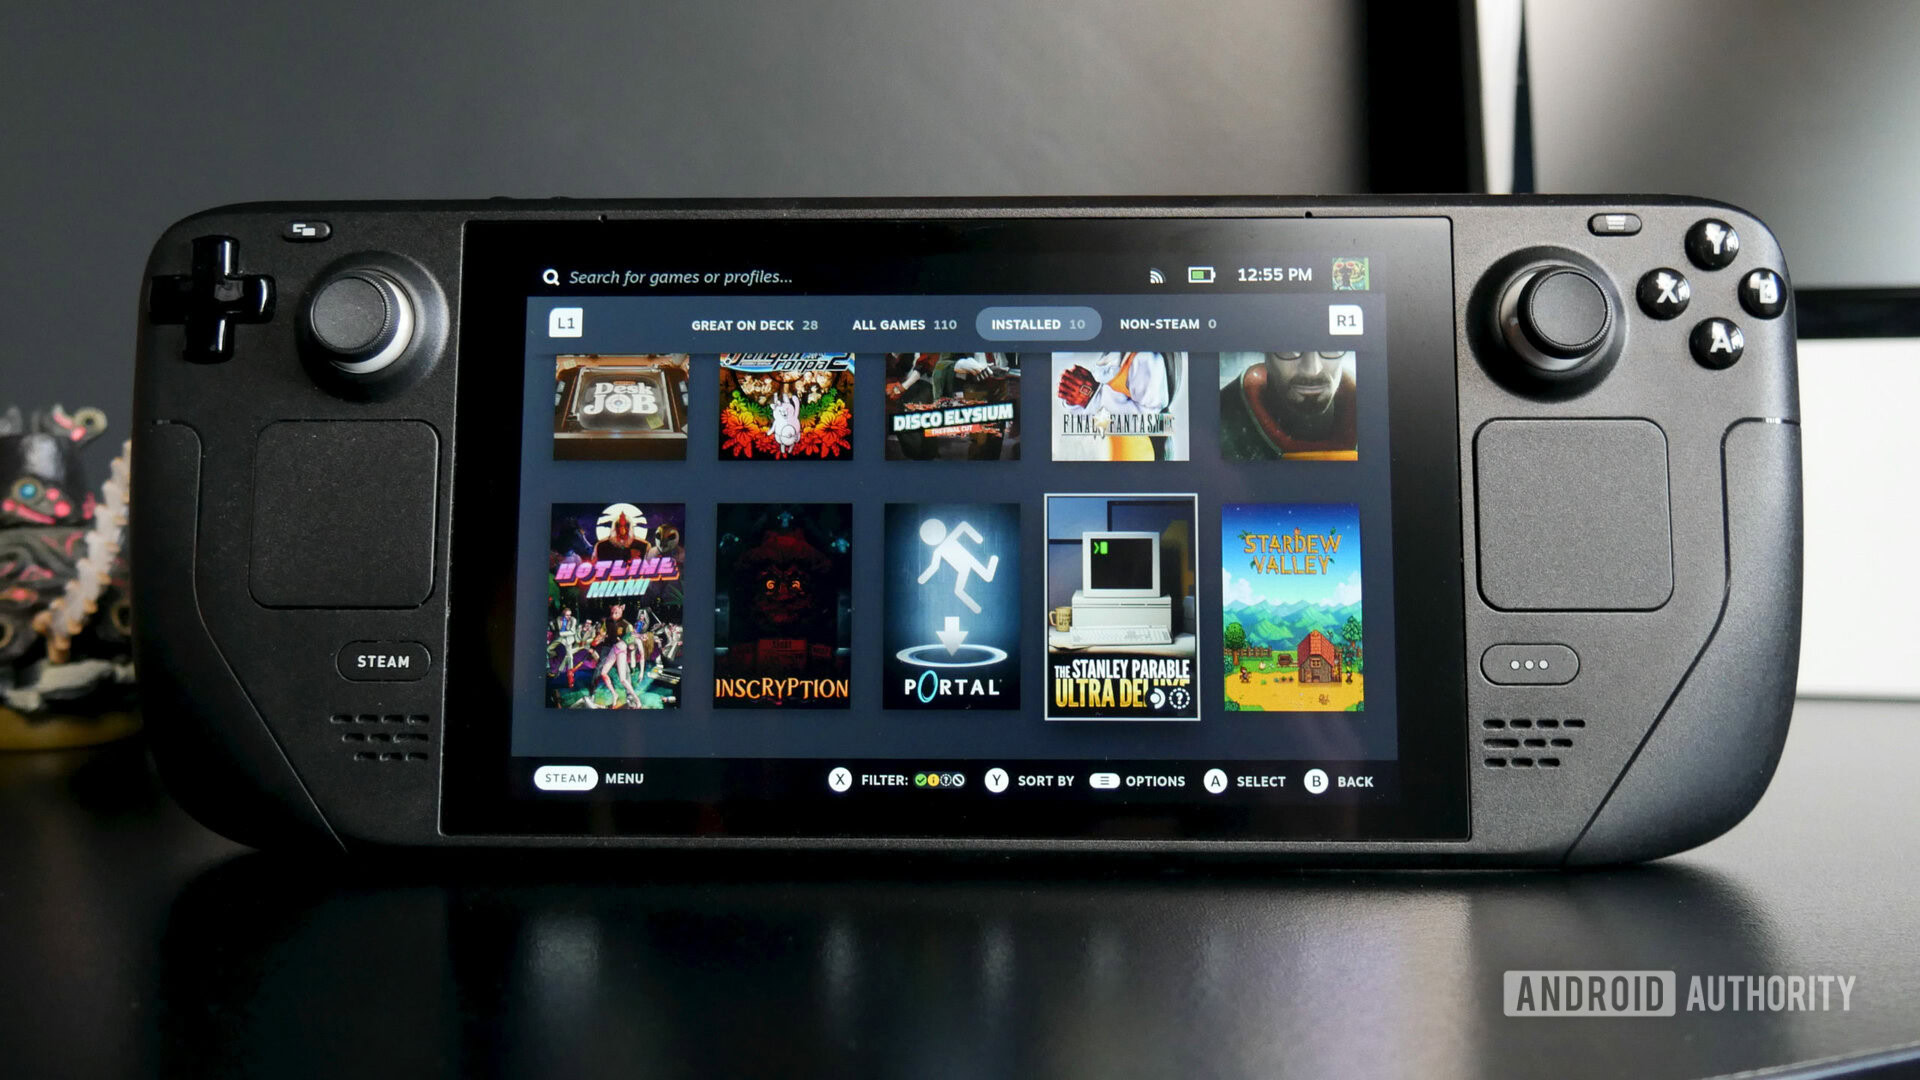 Valve Updates the Steam Deck with OLED Display, Overhauled